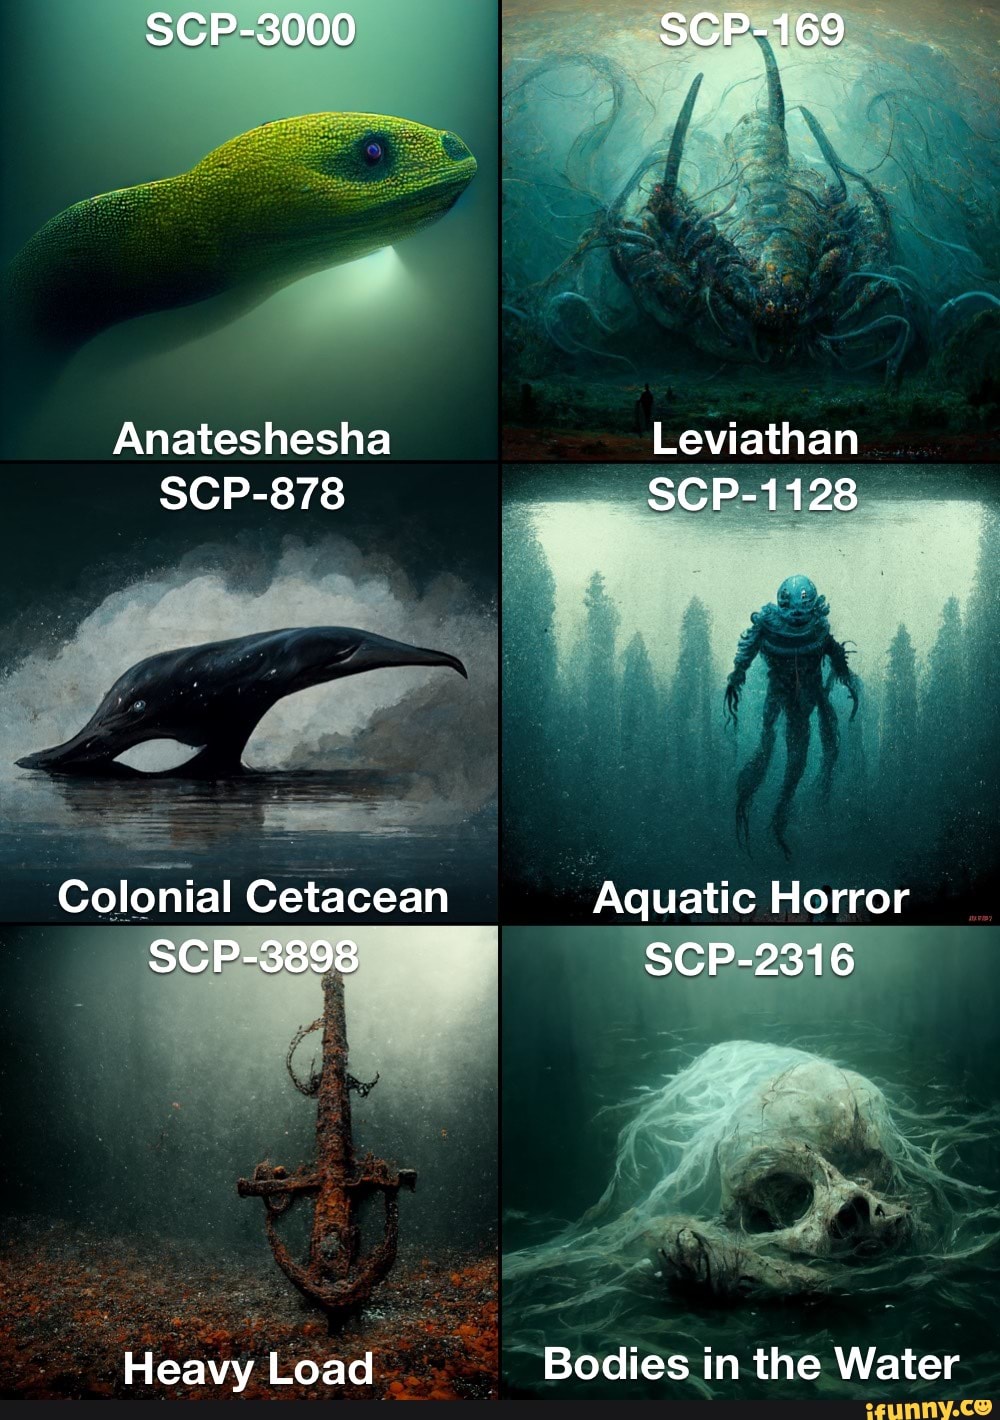 Cthulhu (underwater) Vs Scp 3000 by yapyapthedestroye on DeviantArt